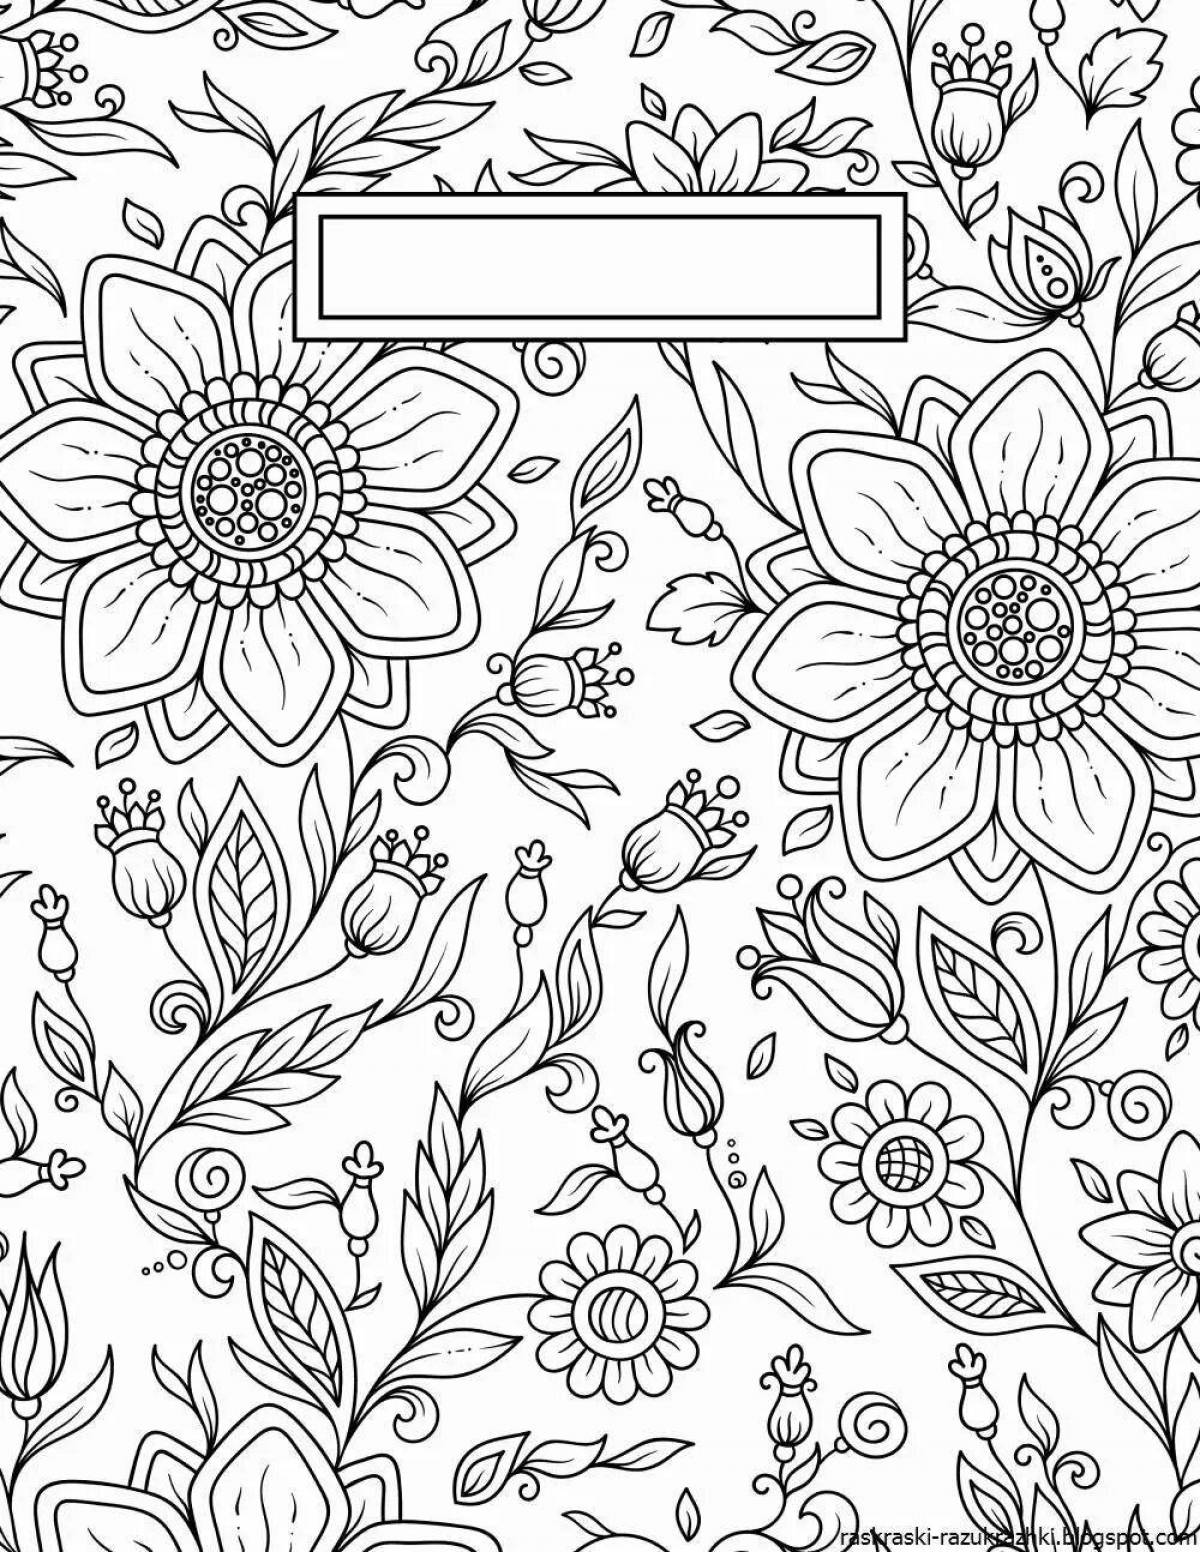 Glamorous coloring for a personal diary